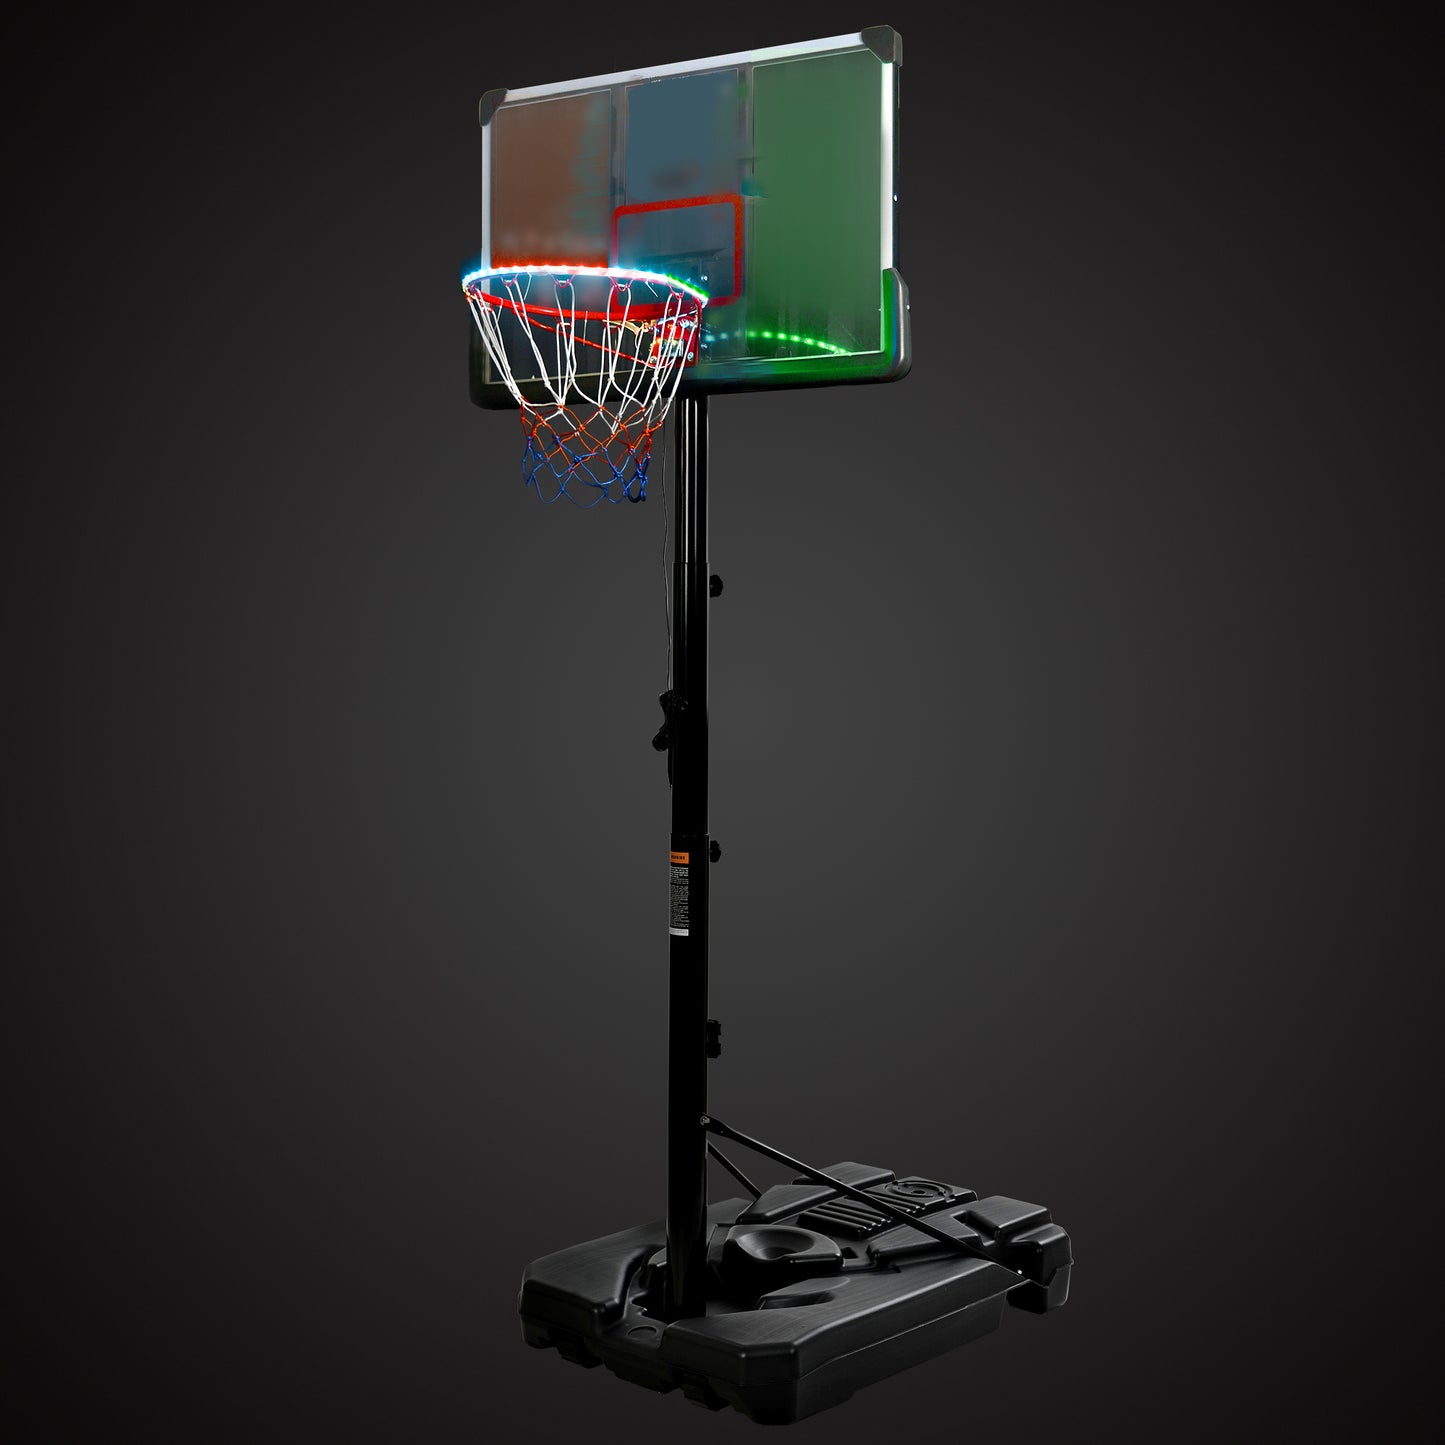 Portable Basketball Hoop Basketball System 6.6-10ft Height Adjustment for Youth Adults LED Basketball Hoop Lights, Colorful lights, Waterproof，Super Bright to Play at Night Outdoors,Good Gift for Kids